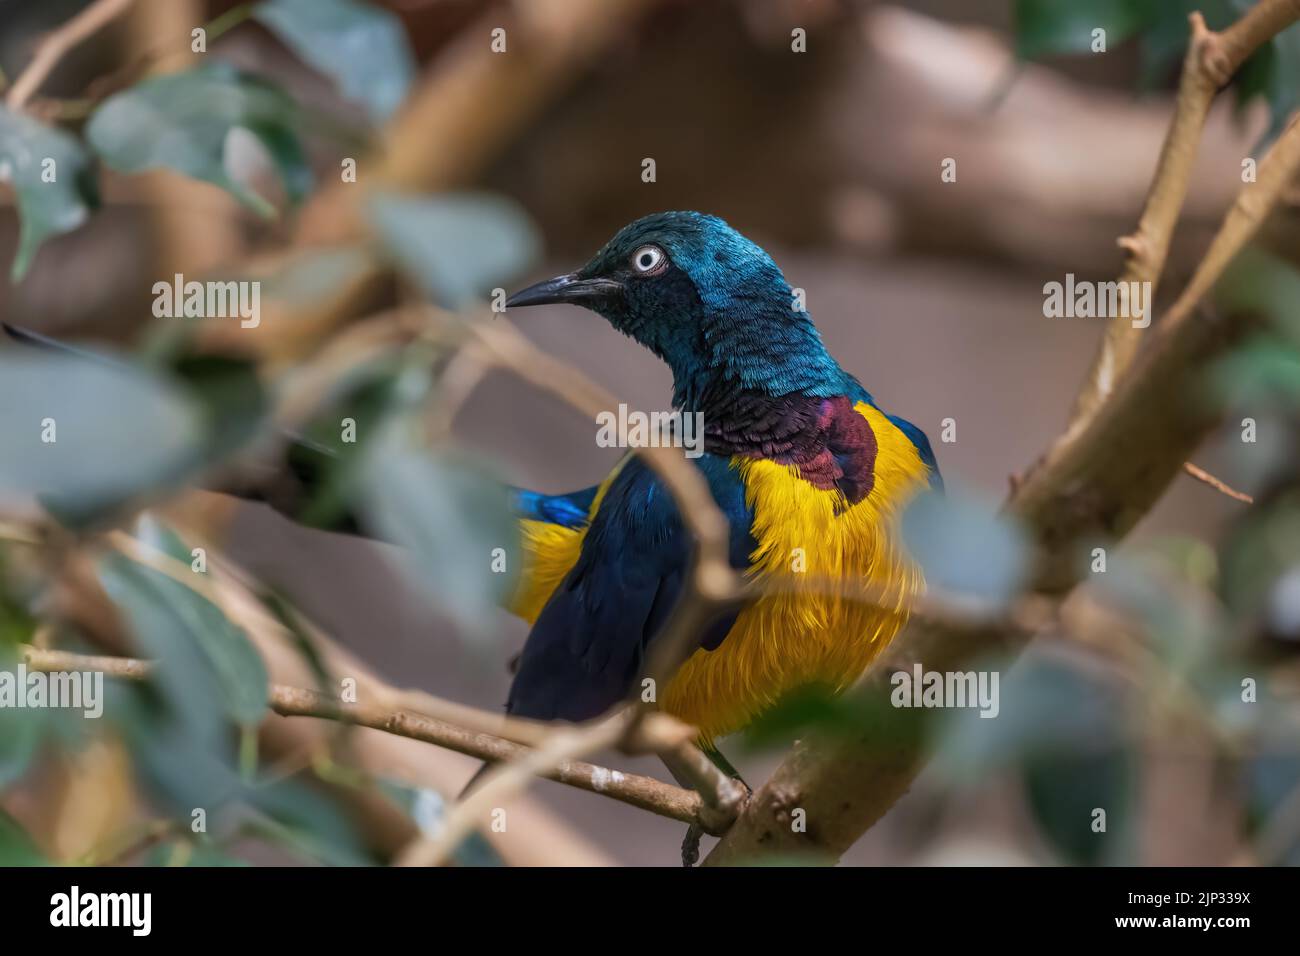 The golden-breasted starling (Lamprotornis regius) or royal starling, passerine bird in the family Sturnidae. Stock Photo